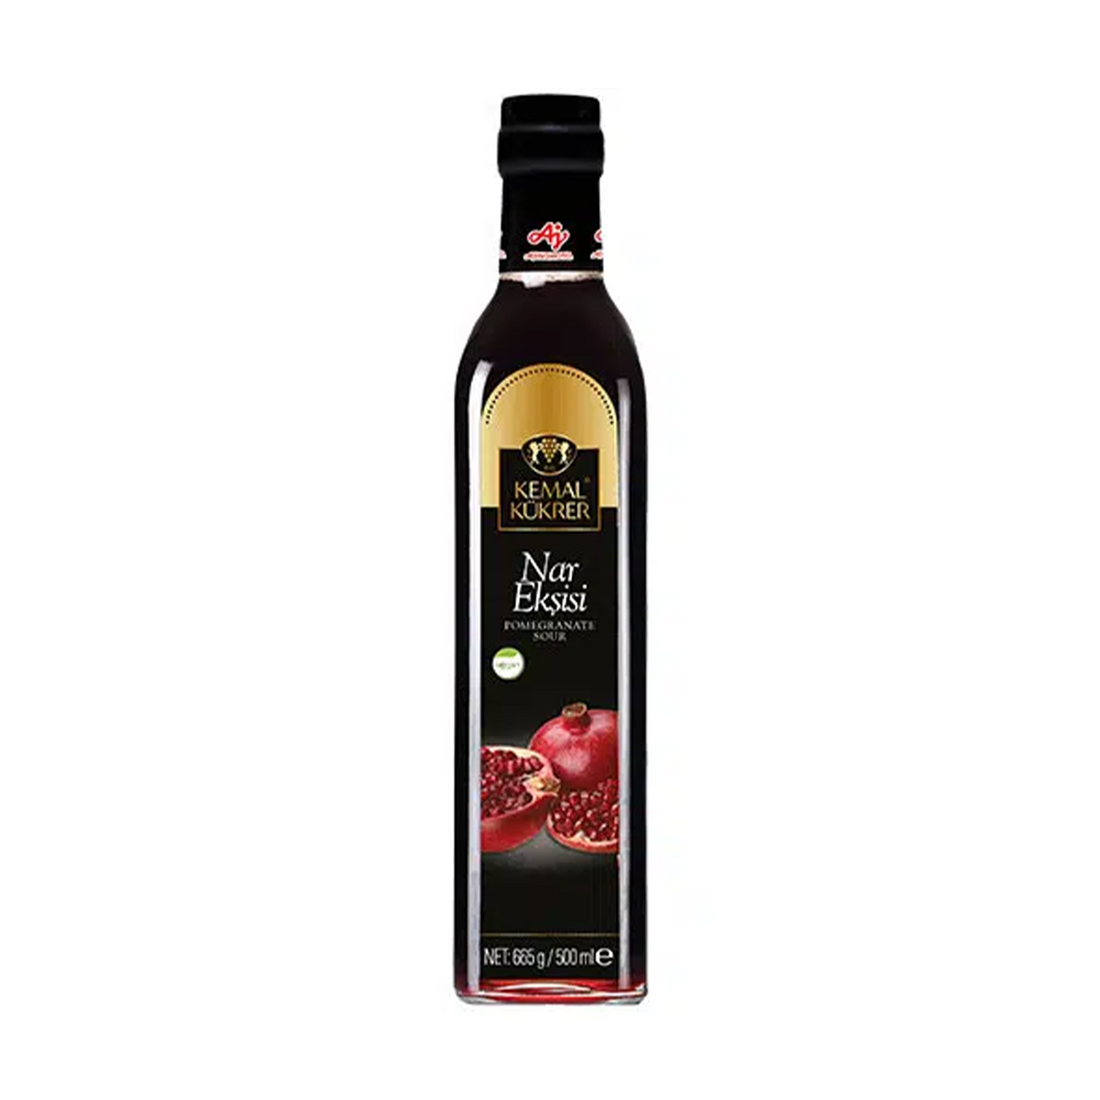 Kemal Kukrer 100% Pomegranate Extract 500ml made in Turkey | Kemal Kukrer Nar Eksisi 100% | Pomegranate Sour